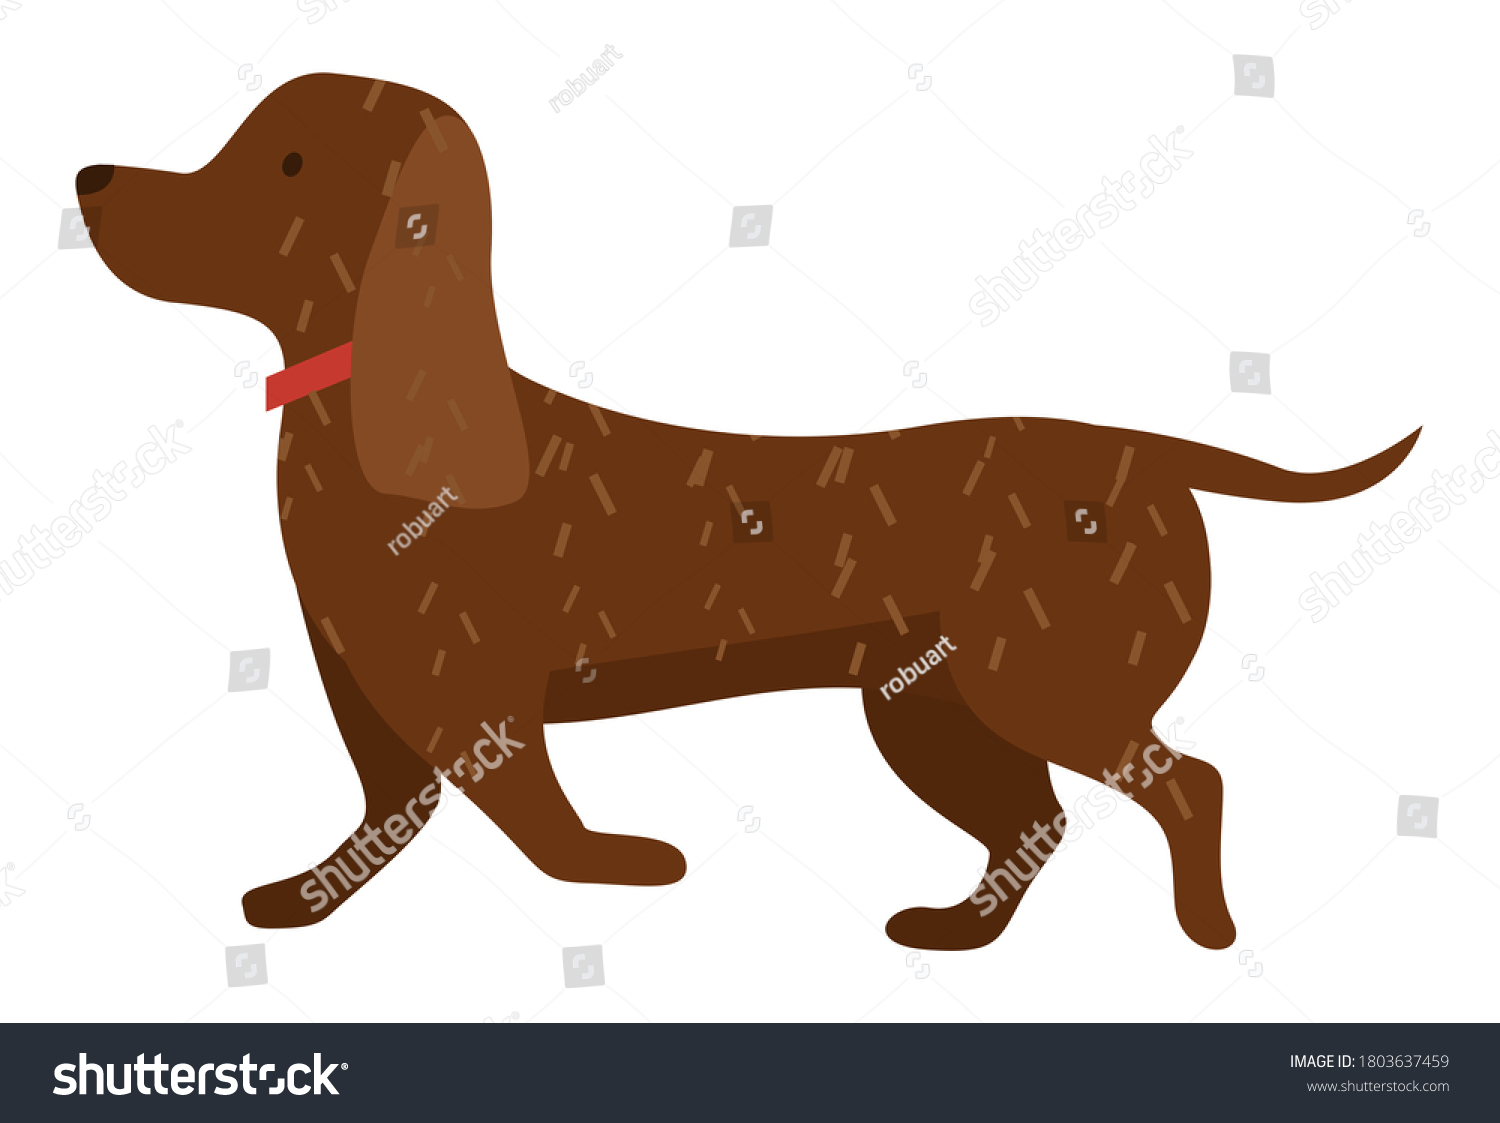 SVG of Cartoon dog vector illustration of cute purebred dachshund isolated on white background side view. Brown puppy runs along the road. Pet in a red collar for a walk. Domestic animal adorable doggy svg